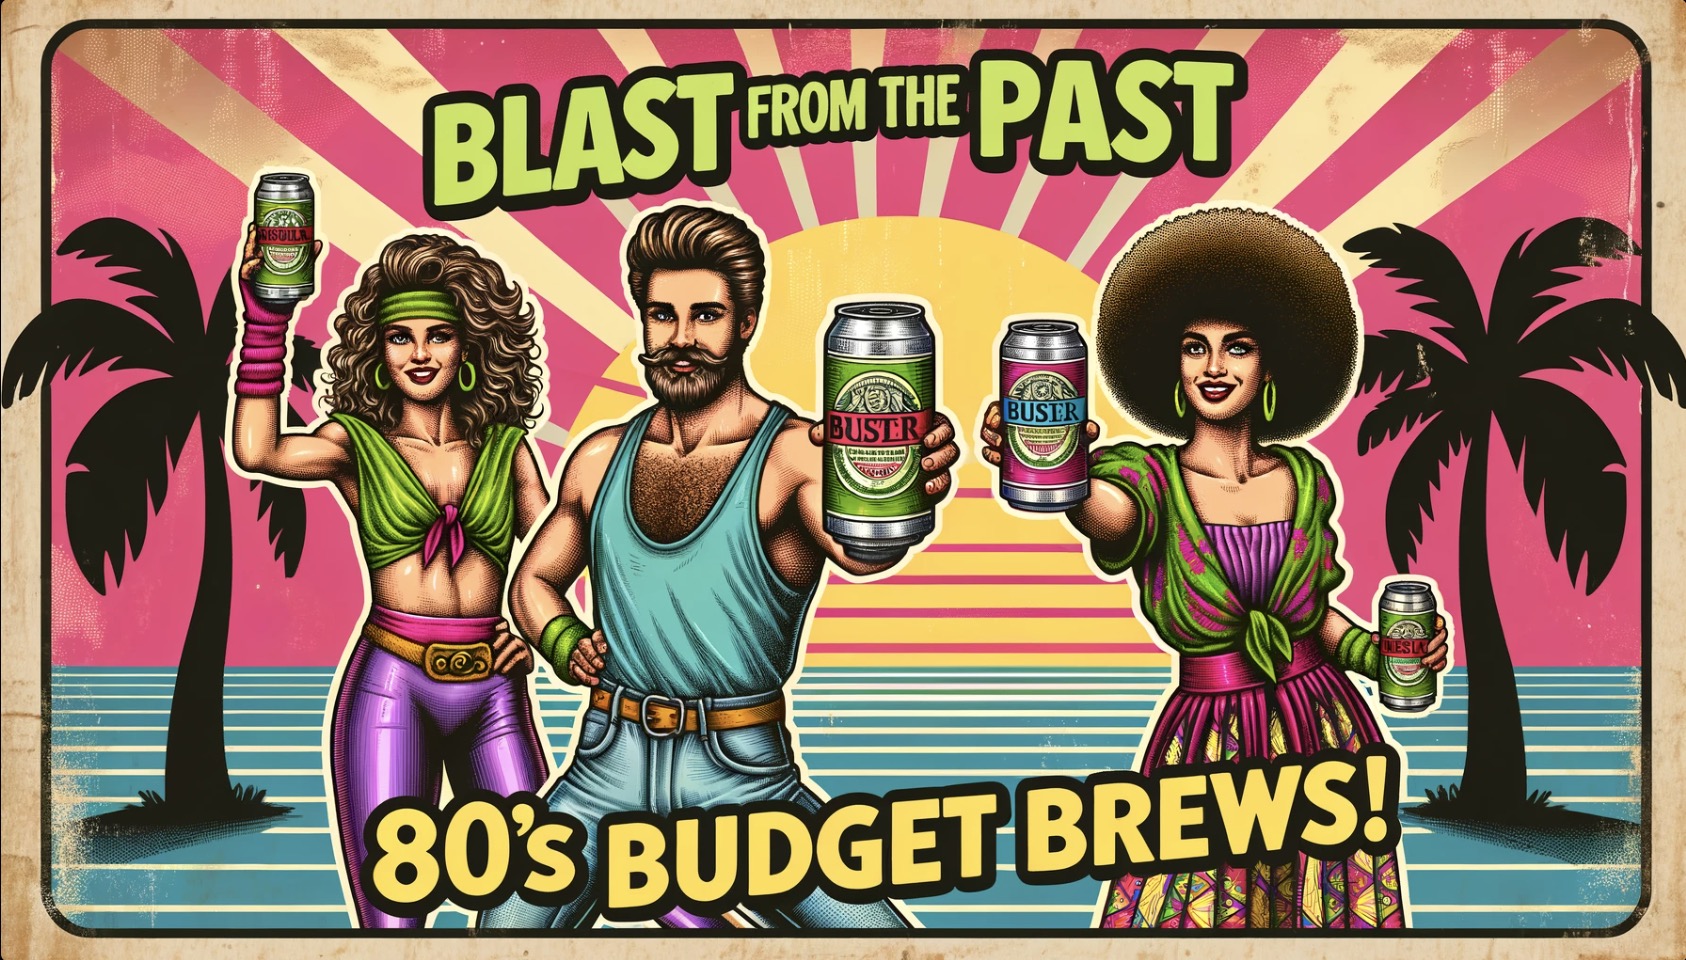 What Were Some Cheap Beers of the 1980s?